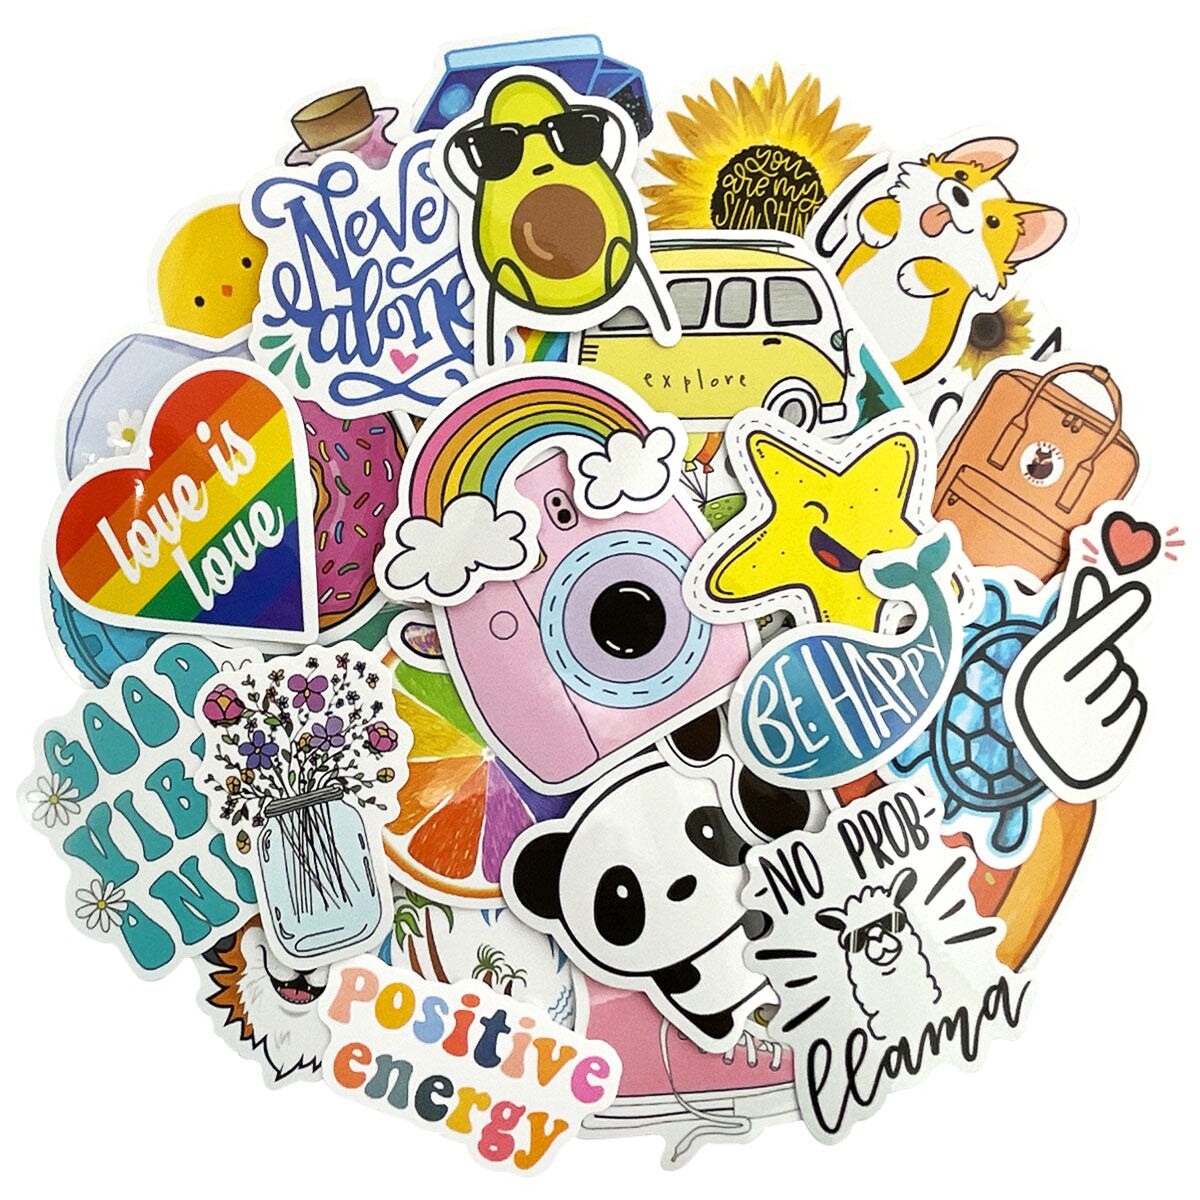 Wrapables Waterproof Vinyl Stickers for Water Bottles, Laptop, Phones, Skateboards, Decals for Teens 100pcs Christmas